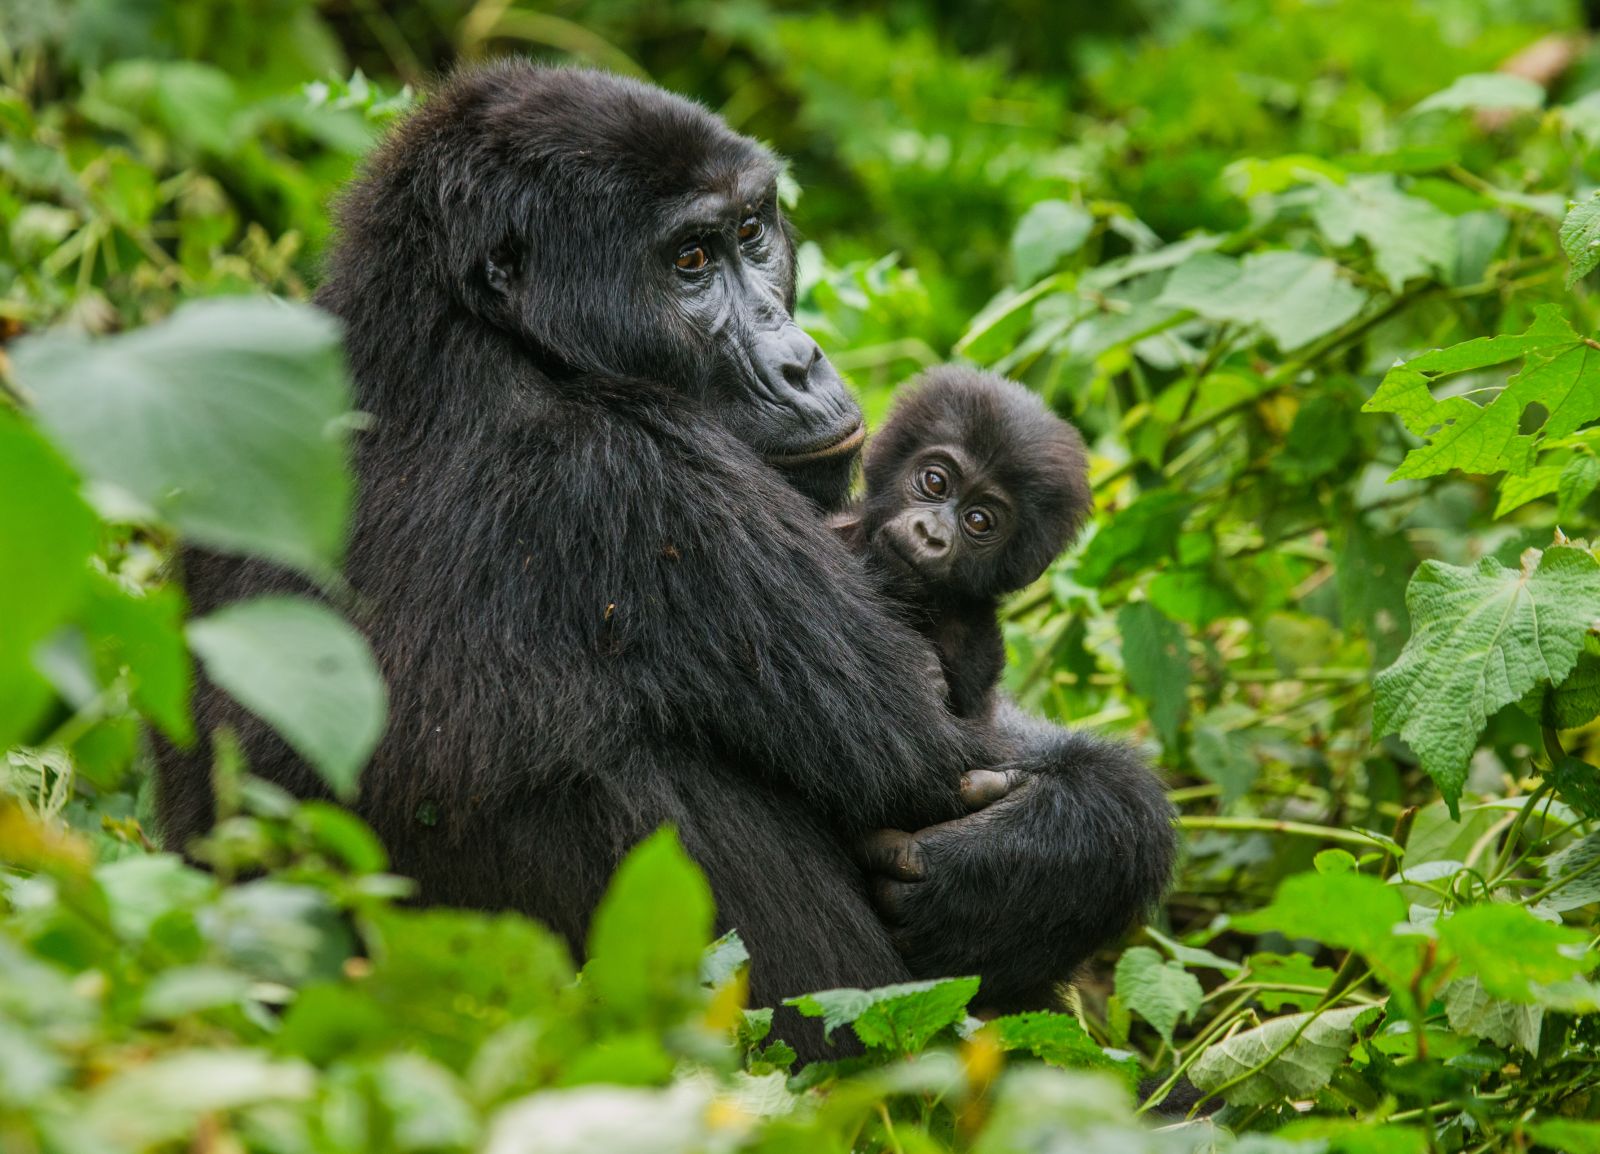 A mountain gorilla and baby in the forests of Uganda